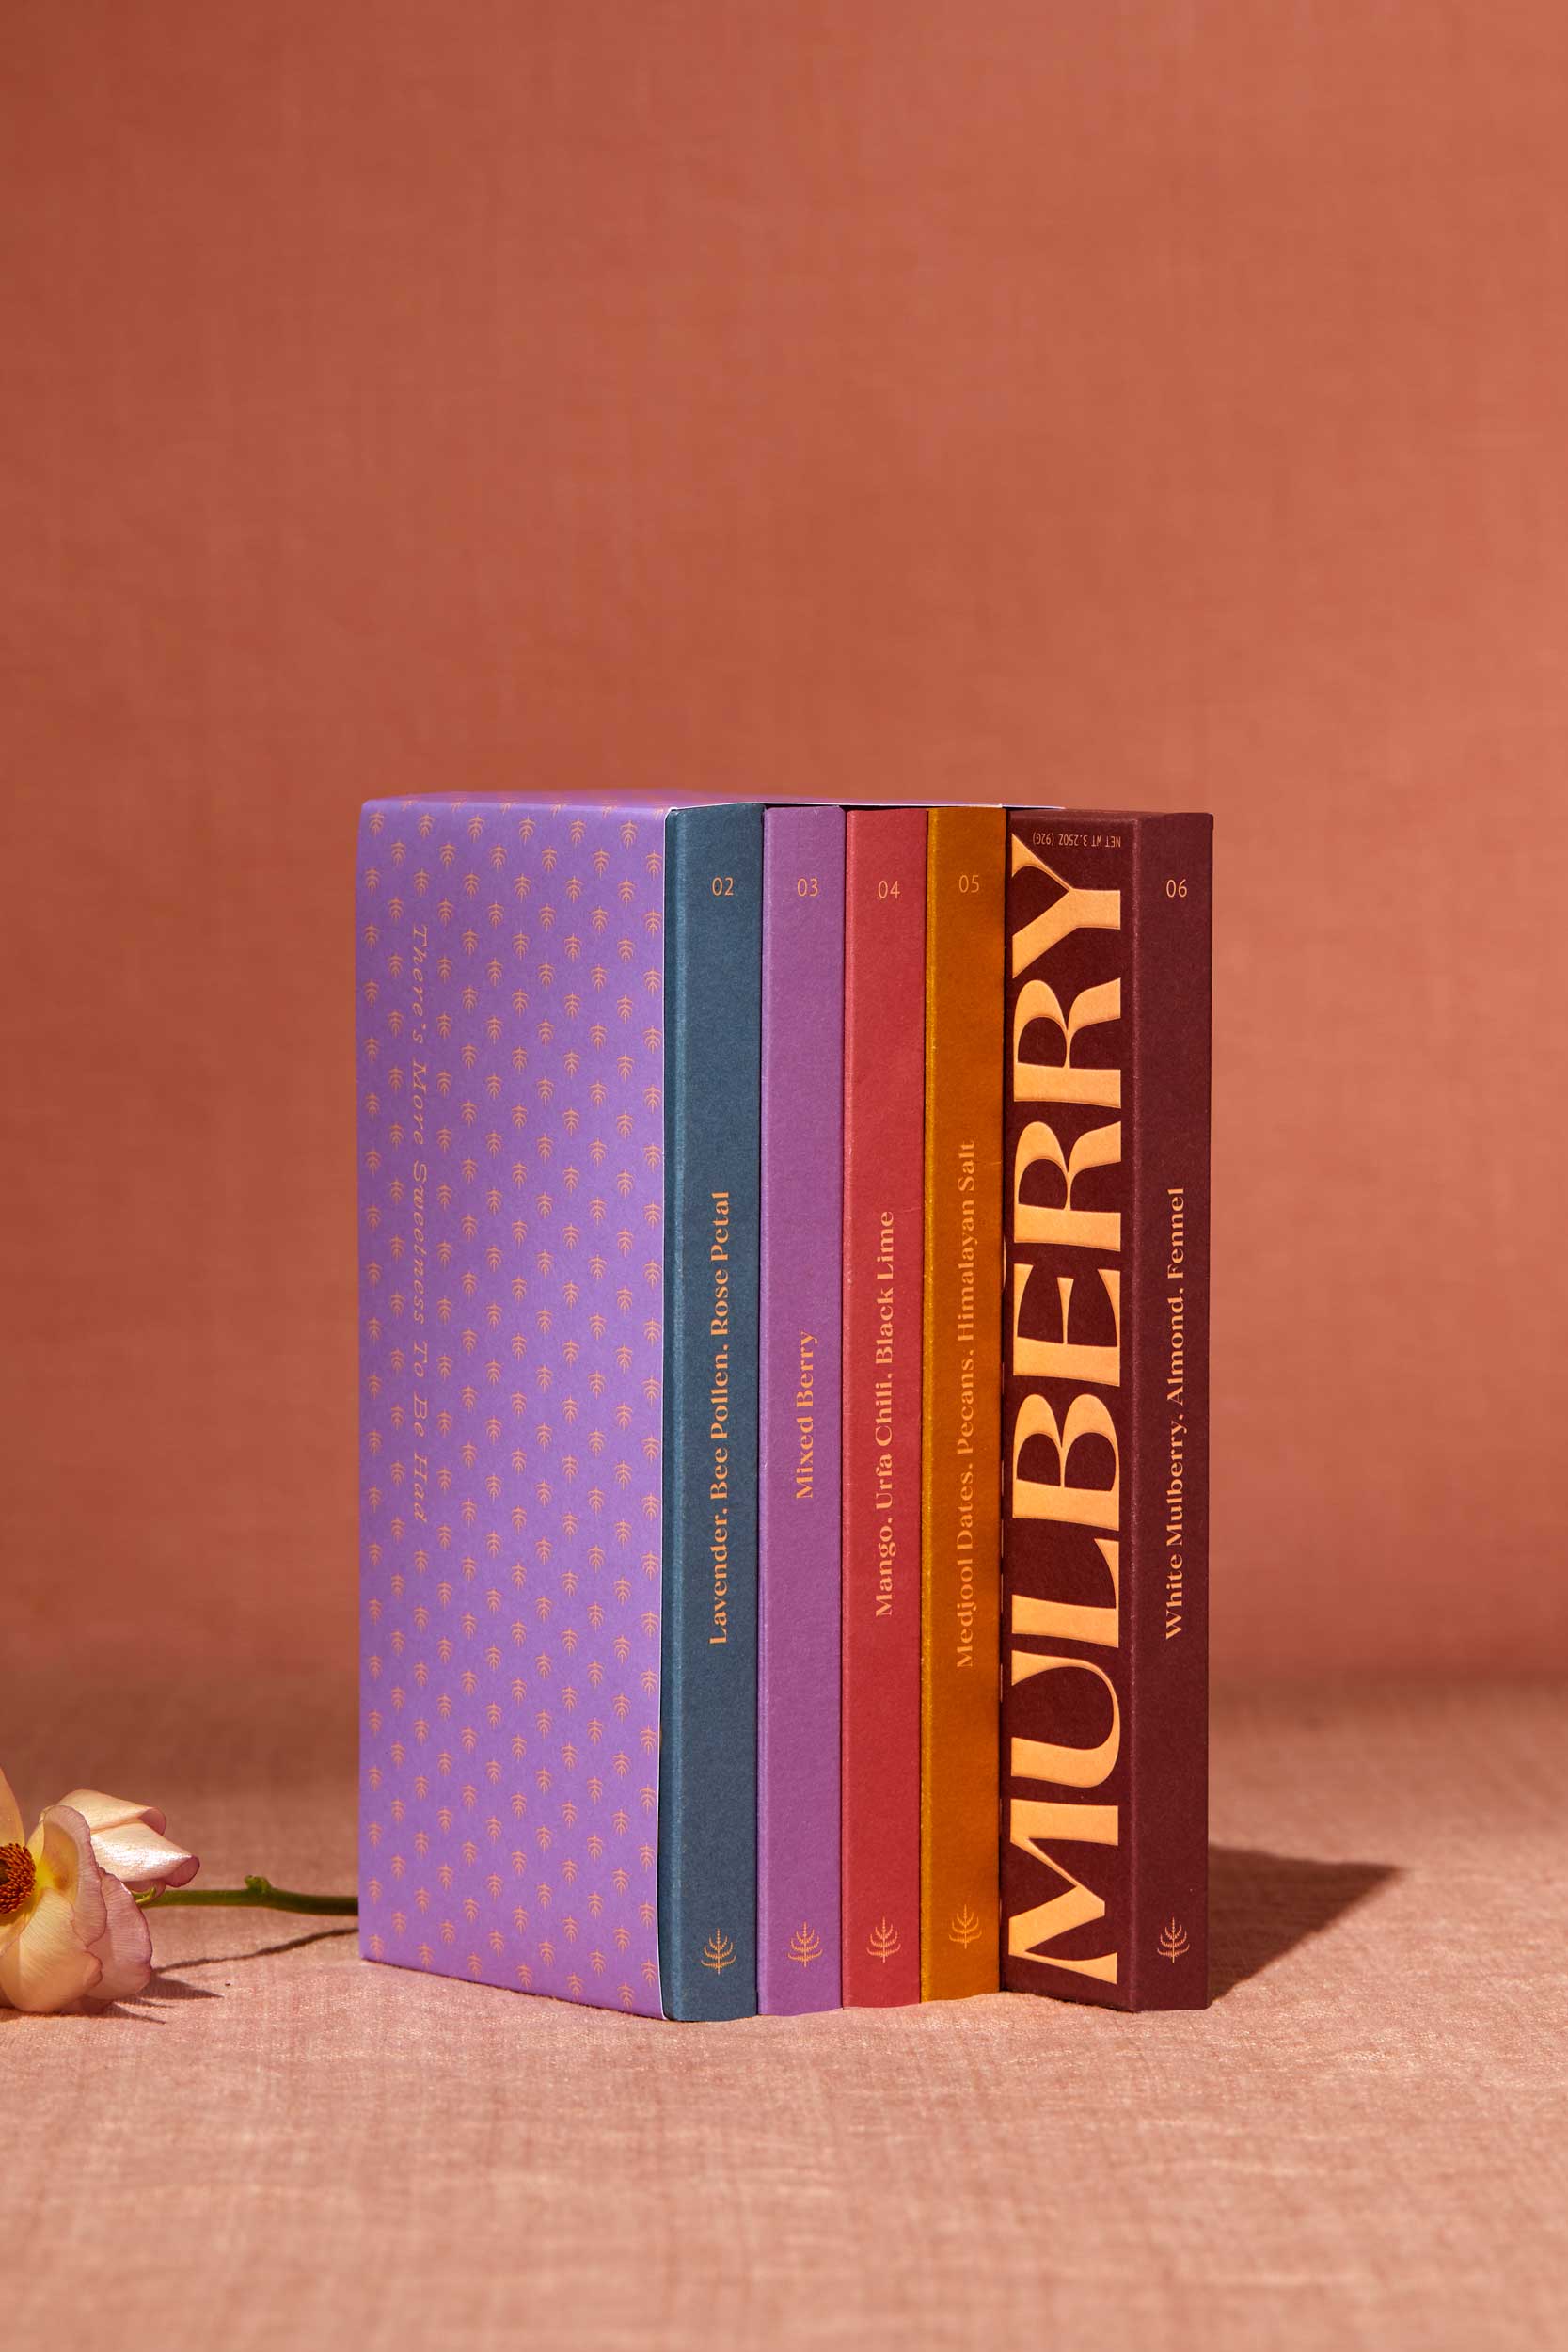 A gift set of 5 date sweetened chocolate bars with no added sugar stands on a peach linen backdrop. To the left of the gift set is a delicate flower. The gift set resembles a library set of books and is wrapped in purple paper adorned with a mulberry motif. The 5 chocolate boxes include: Lavender, Bee Pollen, Rose Petal in sky blue; Mixed Berry in lavender; Mango, Urfa Chili, Black Lime in rose; Medjool Date, Pecan, Himalayan Salt in mustard; and, White Mulberry, Almond, Fennel in a maroon box.